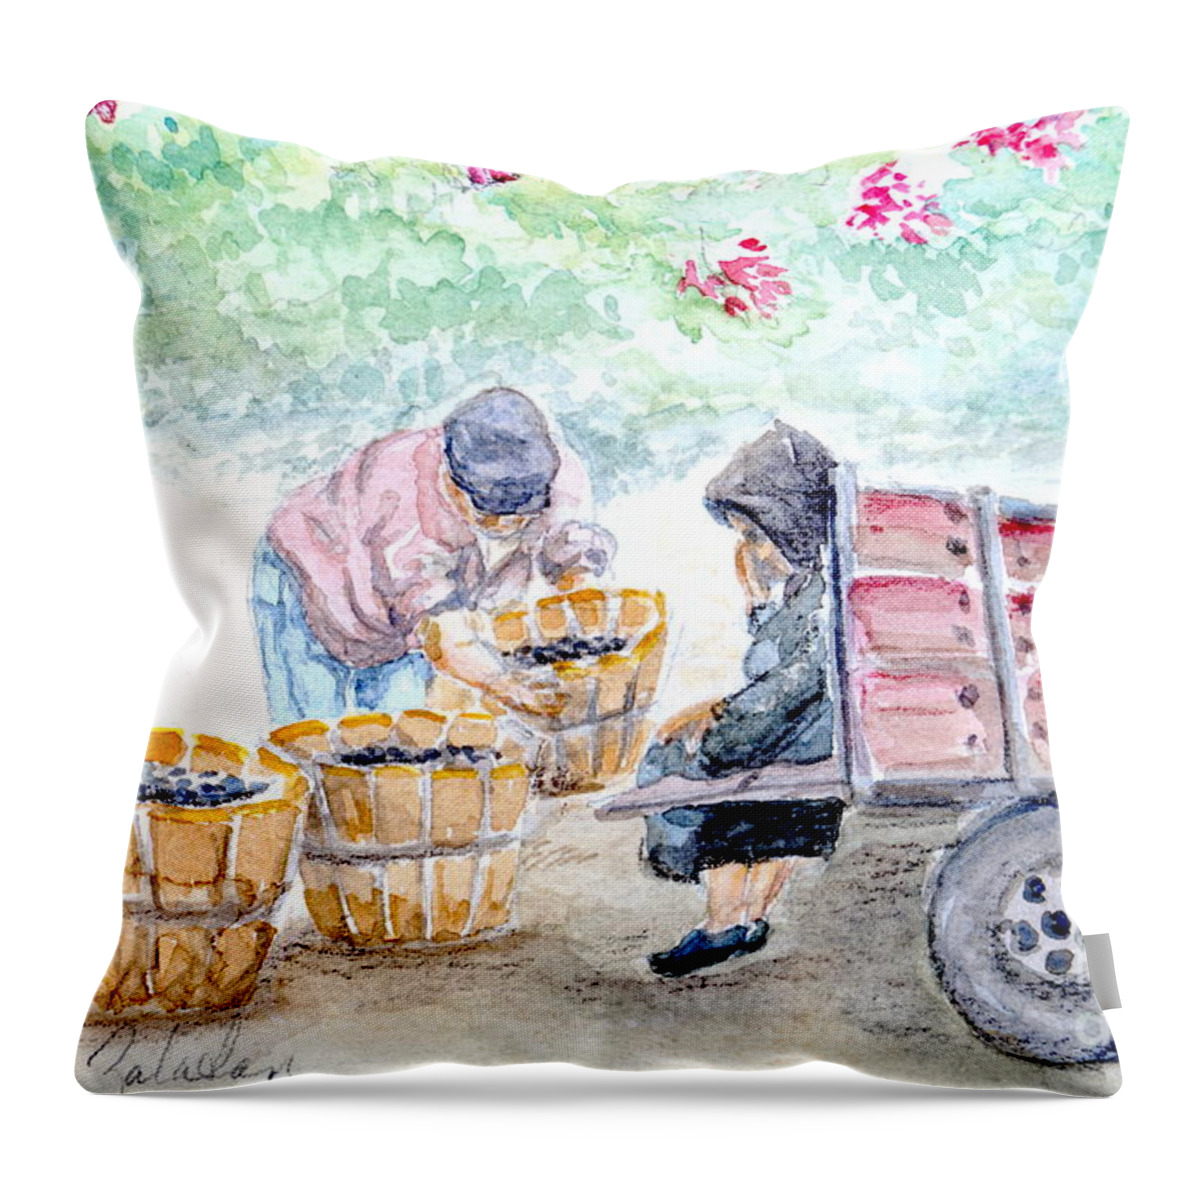 Harvest Throw Pillow featuring the painting Olive Pickers by Marilyn Zalatan